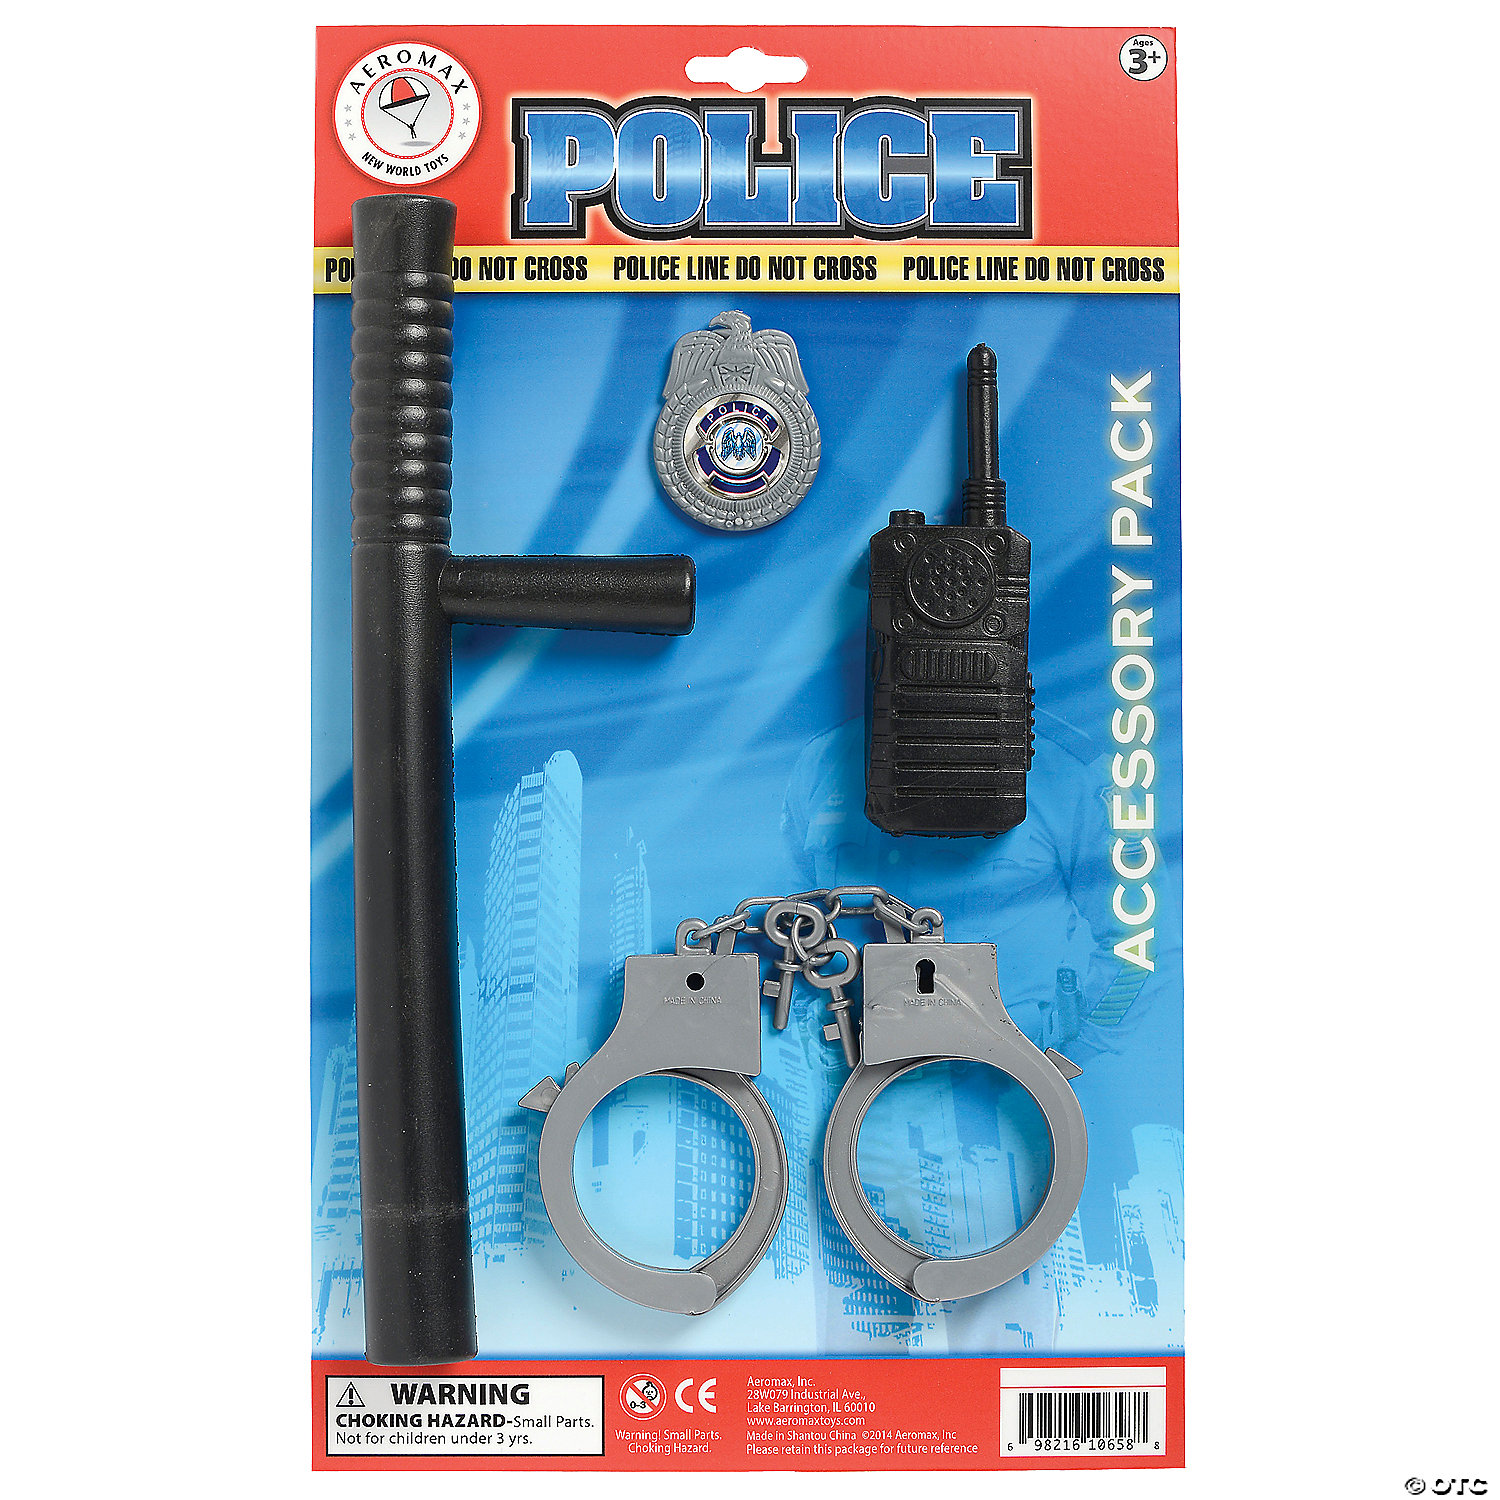 POLICE OFFICER COSTUME OR ACCESSORY KIT - HALLOWEEN